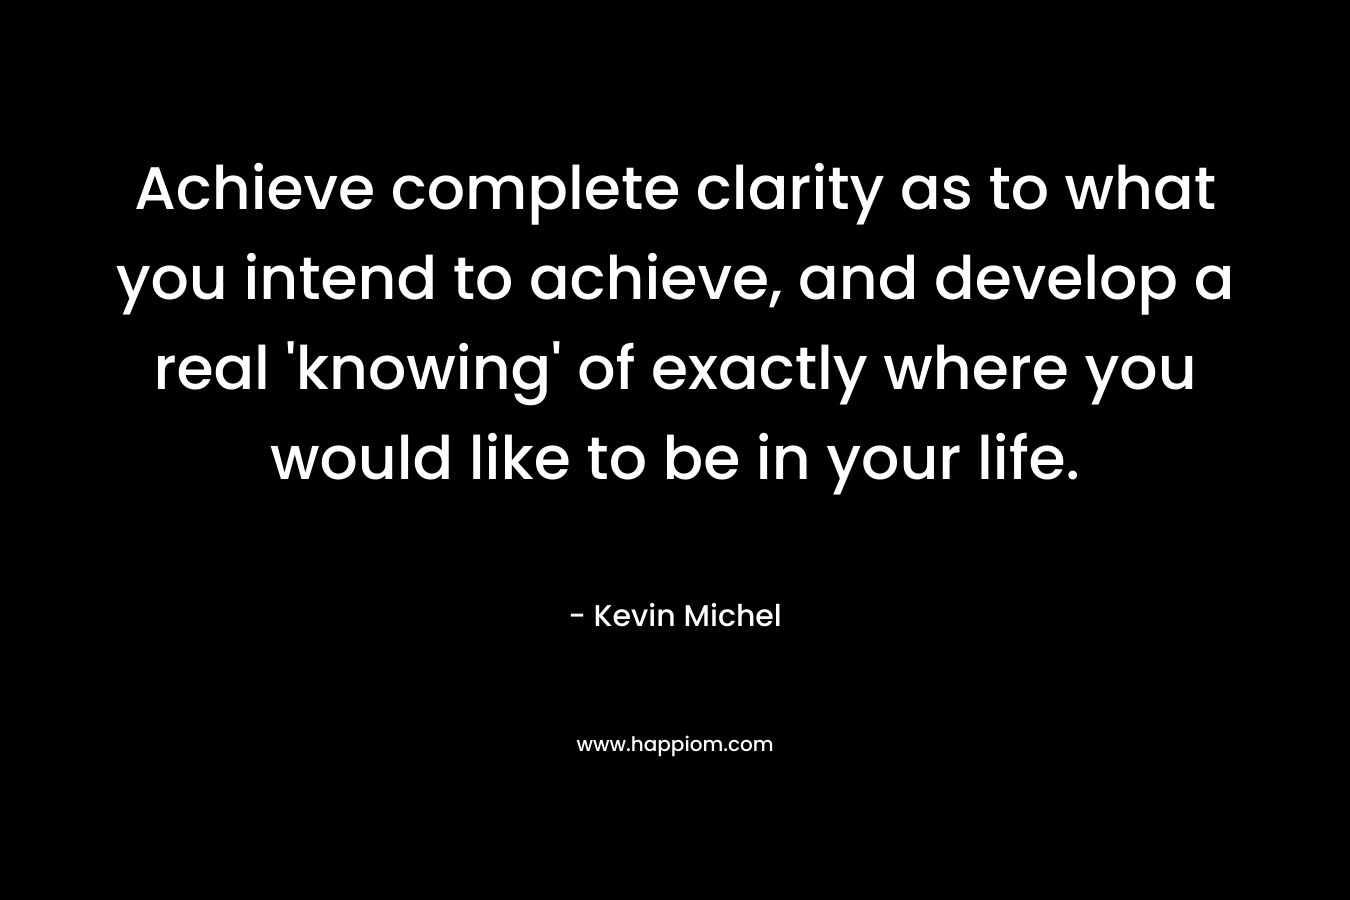 Achieve complete clarity as to what you intend to achieve, and develop a real 'knowing' of exactly where you would like to be in your life.